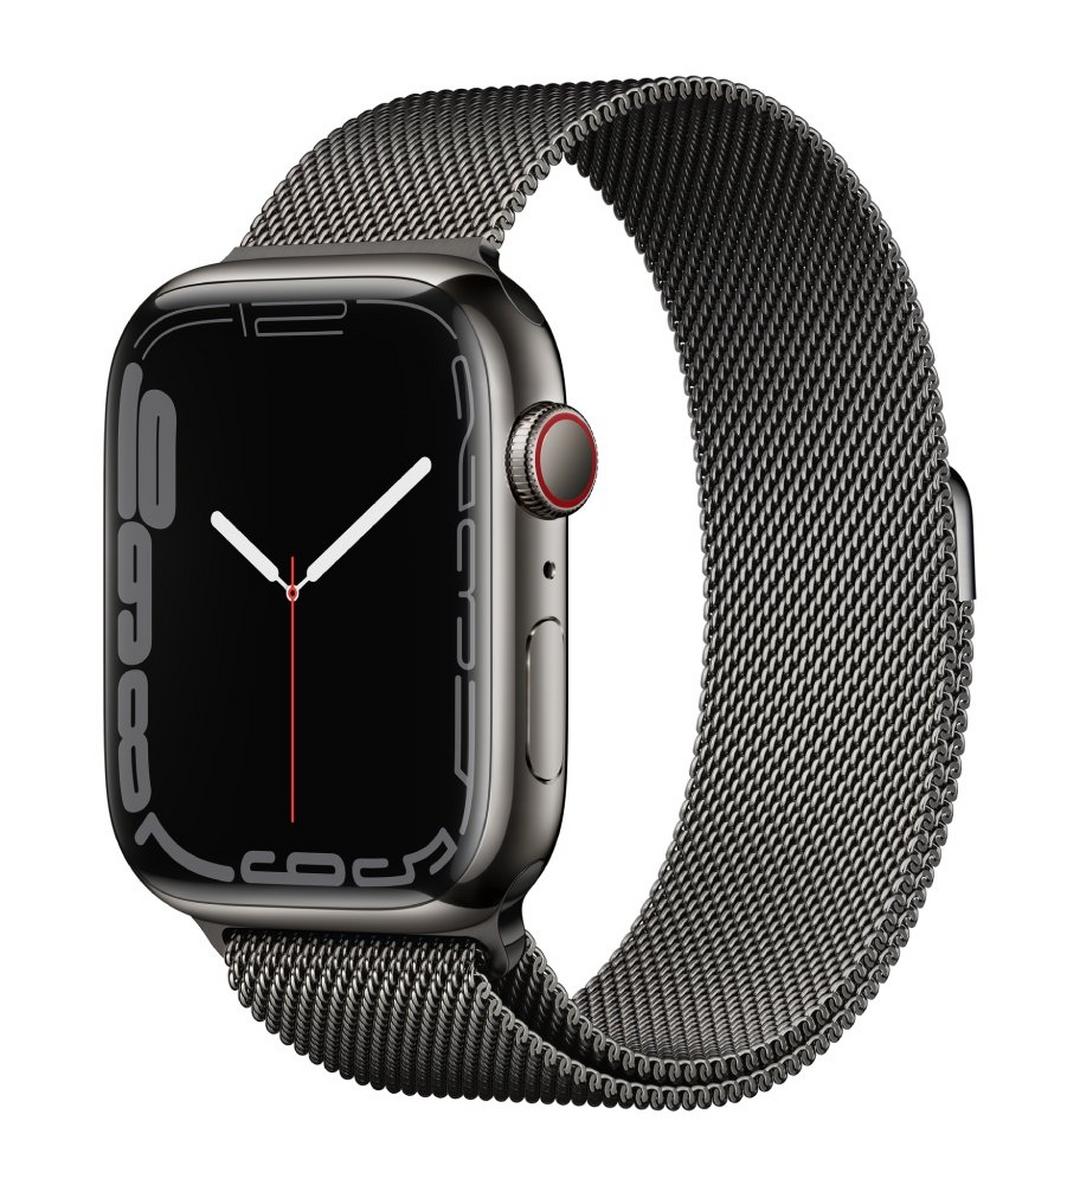 Apple Watch Series 7 Cellular 41mm Stainless Steel - Graphite